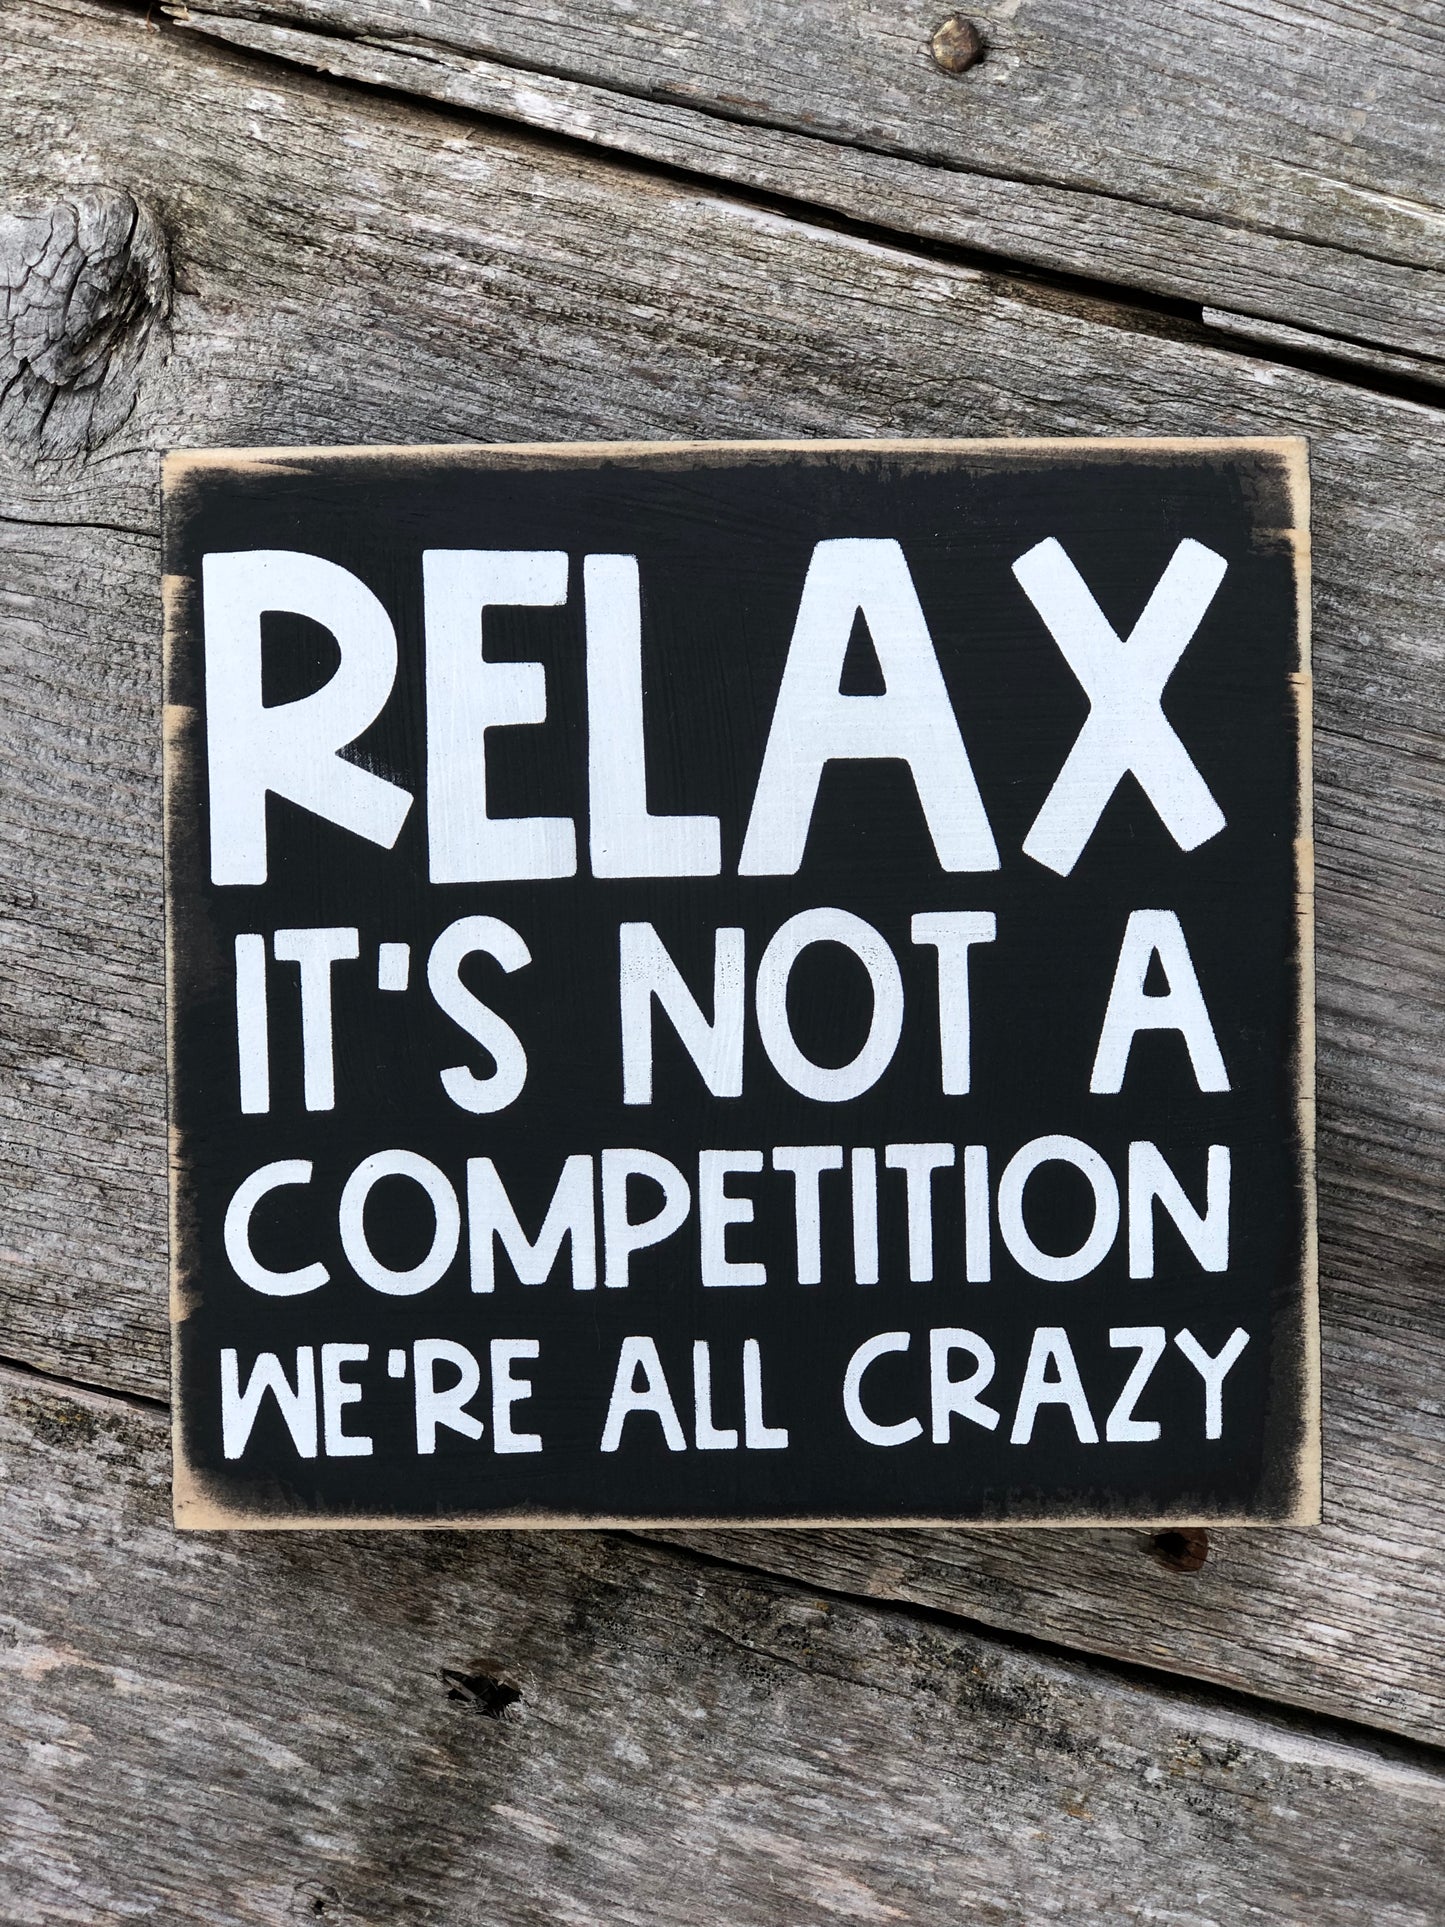 RELAX IT’S NOT A COMPETITION -WE’RE ALL CRAZY -WOOD SIGN